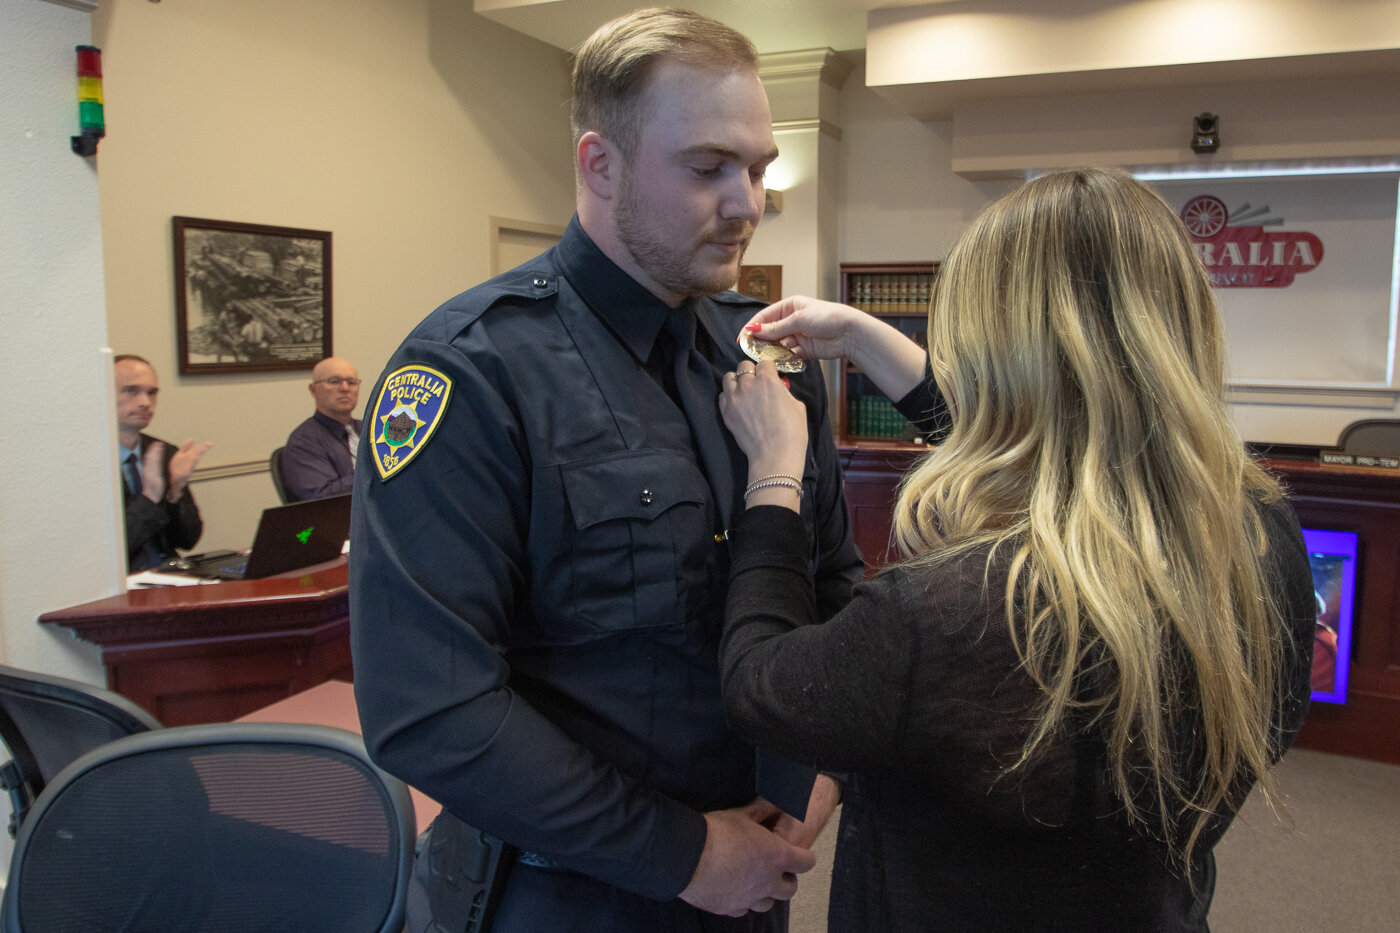 Following being sworn in, Officer August Shulda has his badge pinned on by his girlfriend, Julia Morasch.